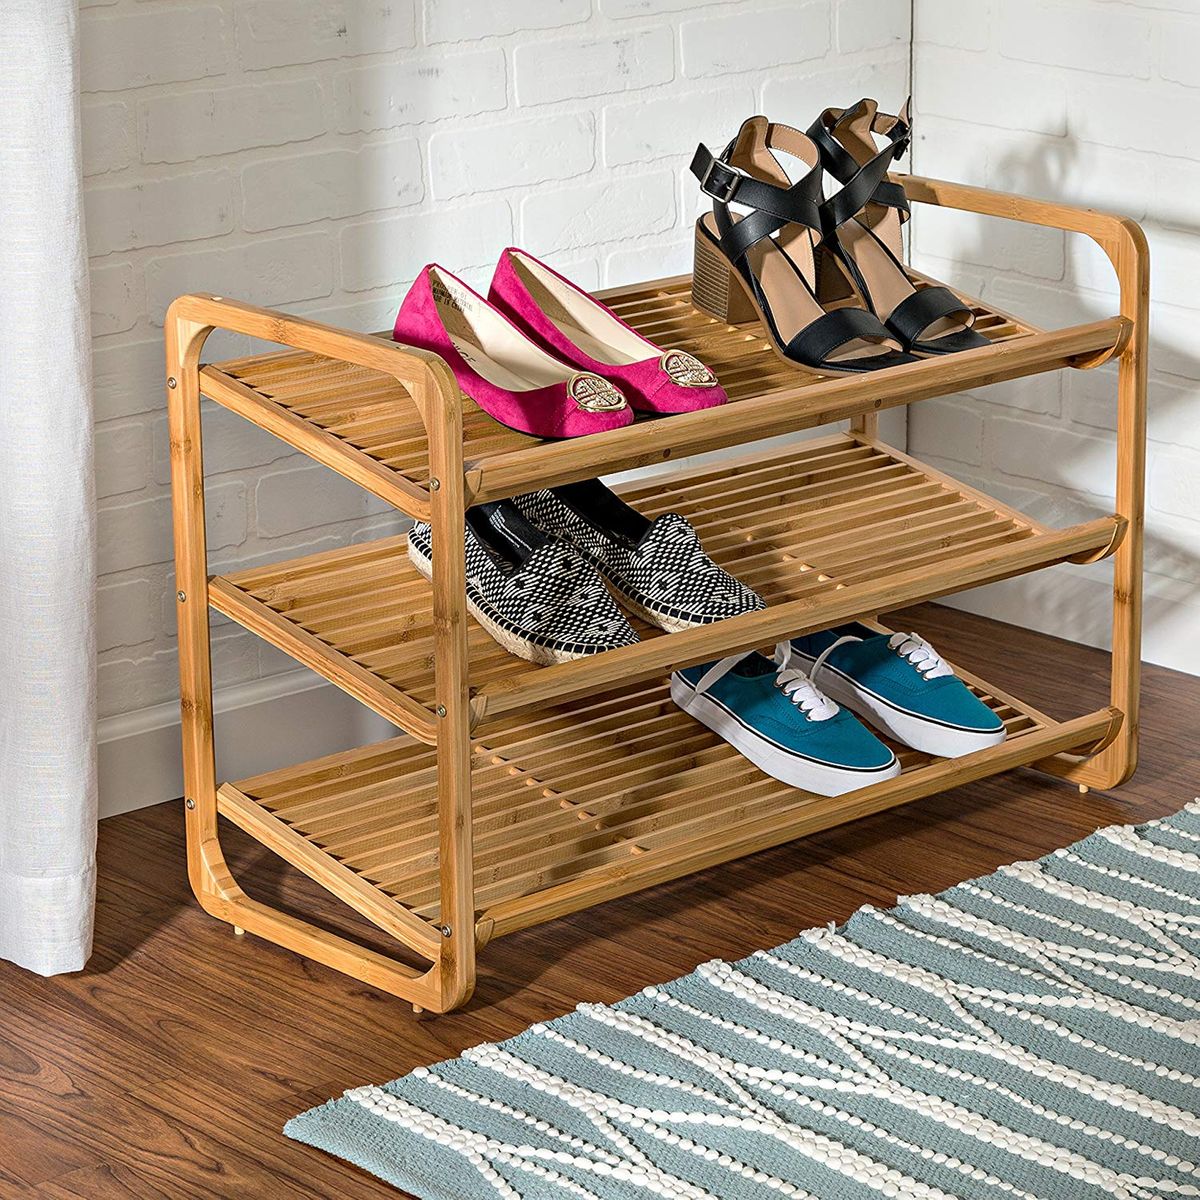 28 Best Shoe Organizers 2021 The Strategist New York Magazine Shoe racks are possibly one of the least appreciated elements of all houses. 28 best shoe organizers 2021 the